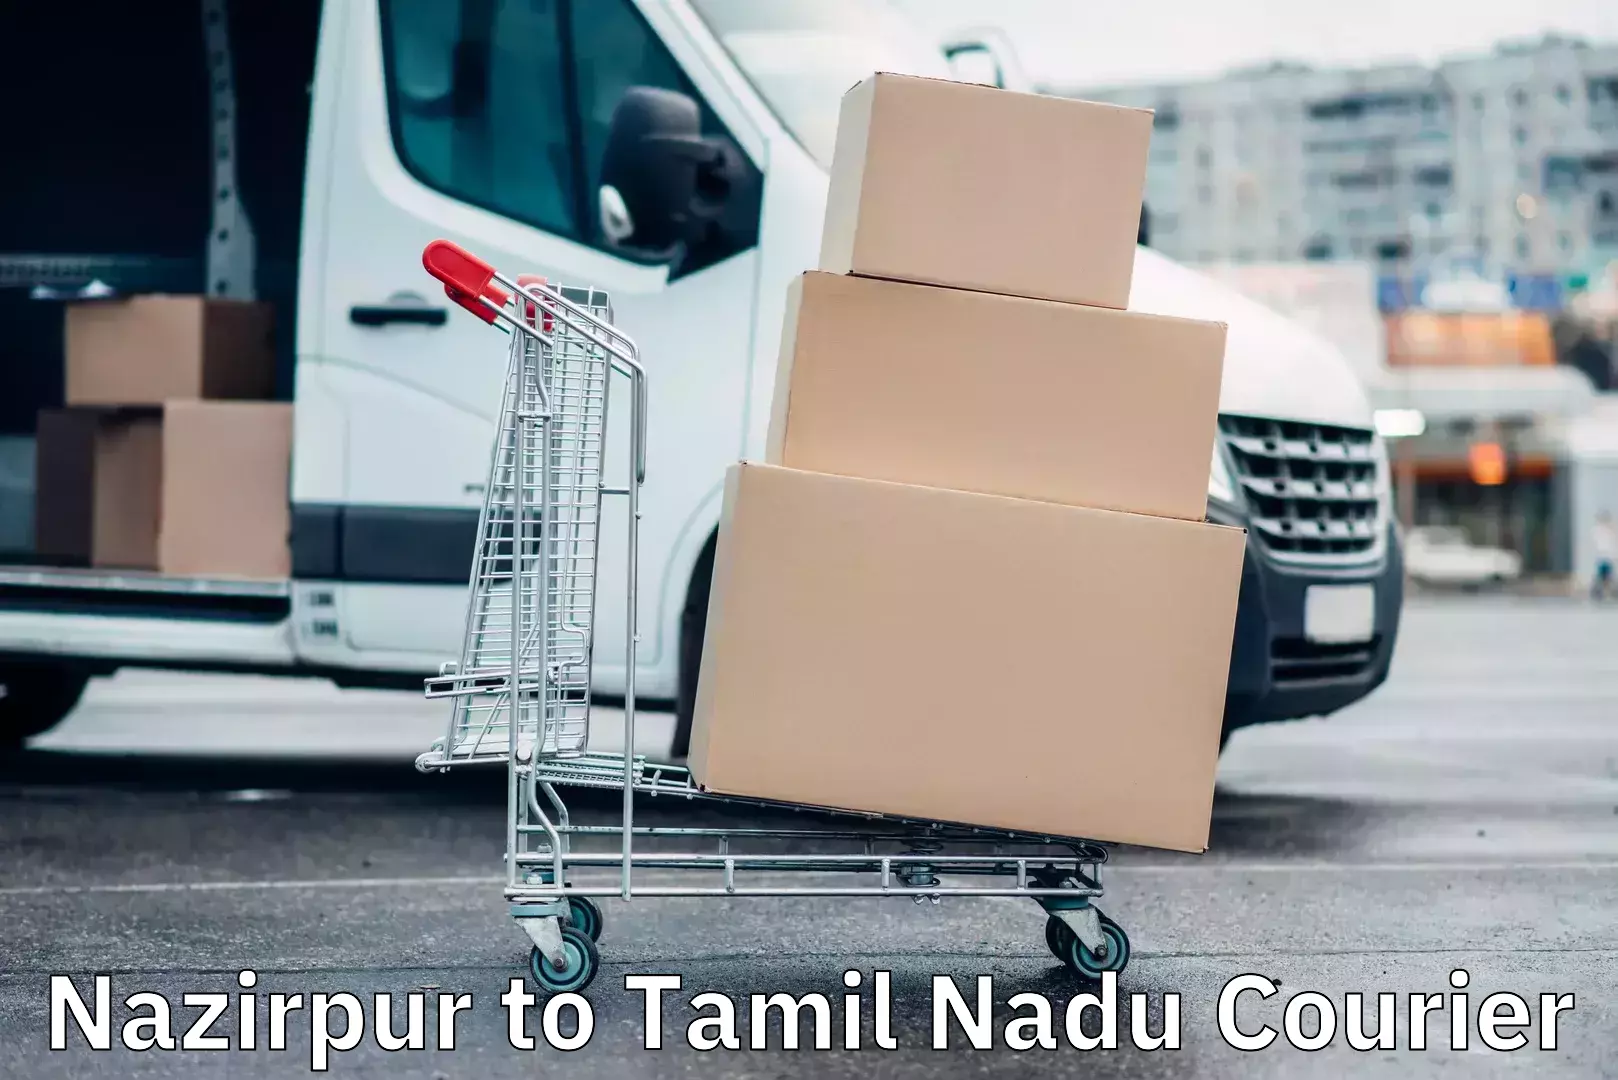 Cash on delivery service Nazirpur to Ennore Port Chennai